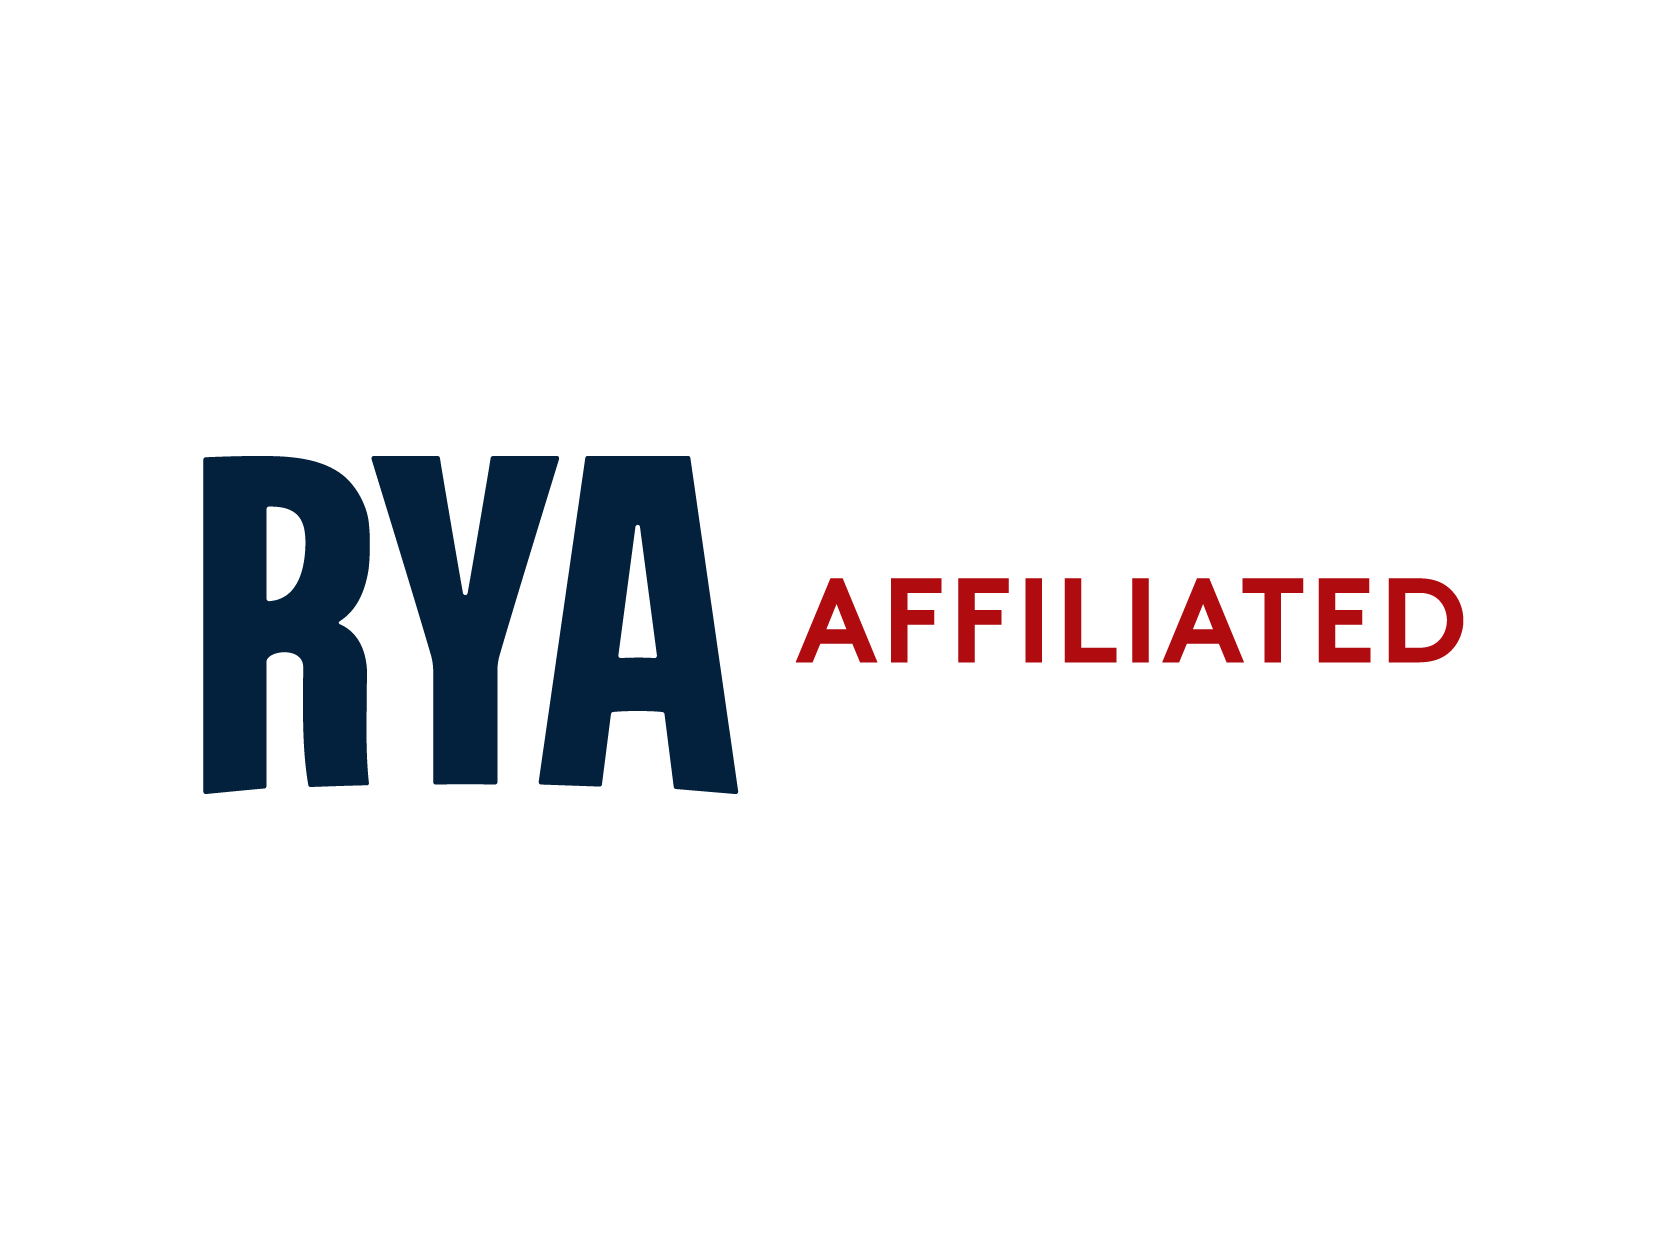 RYA affiliated logo with text side by side